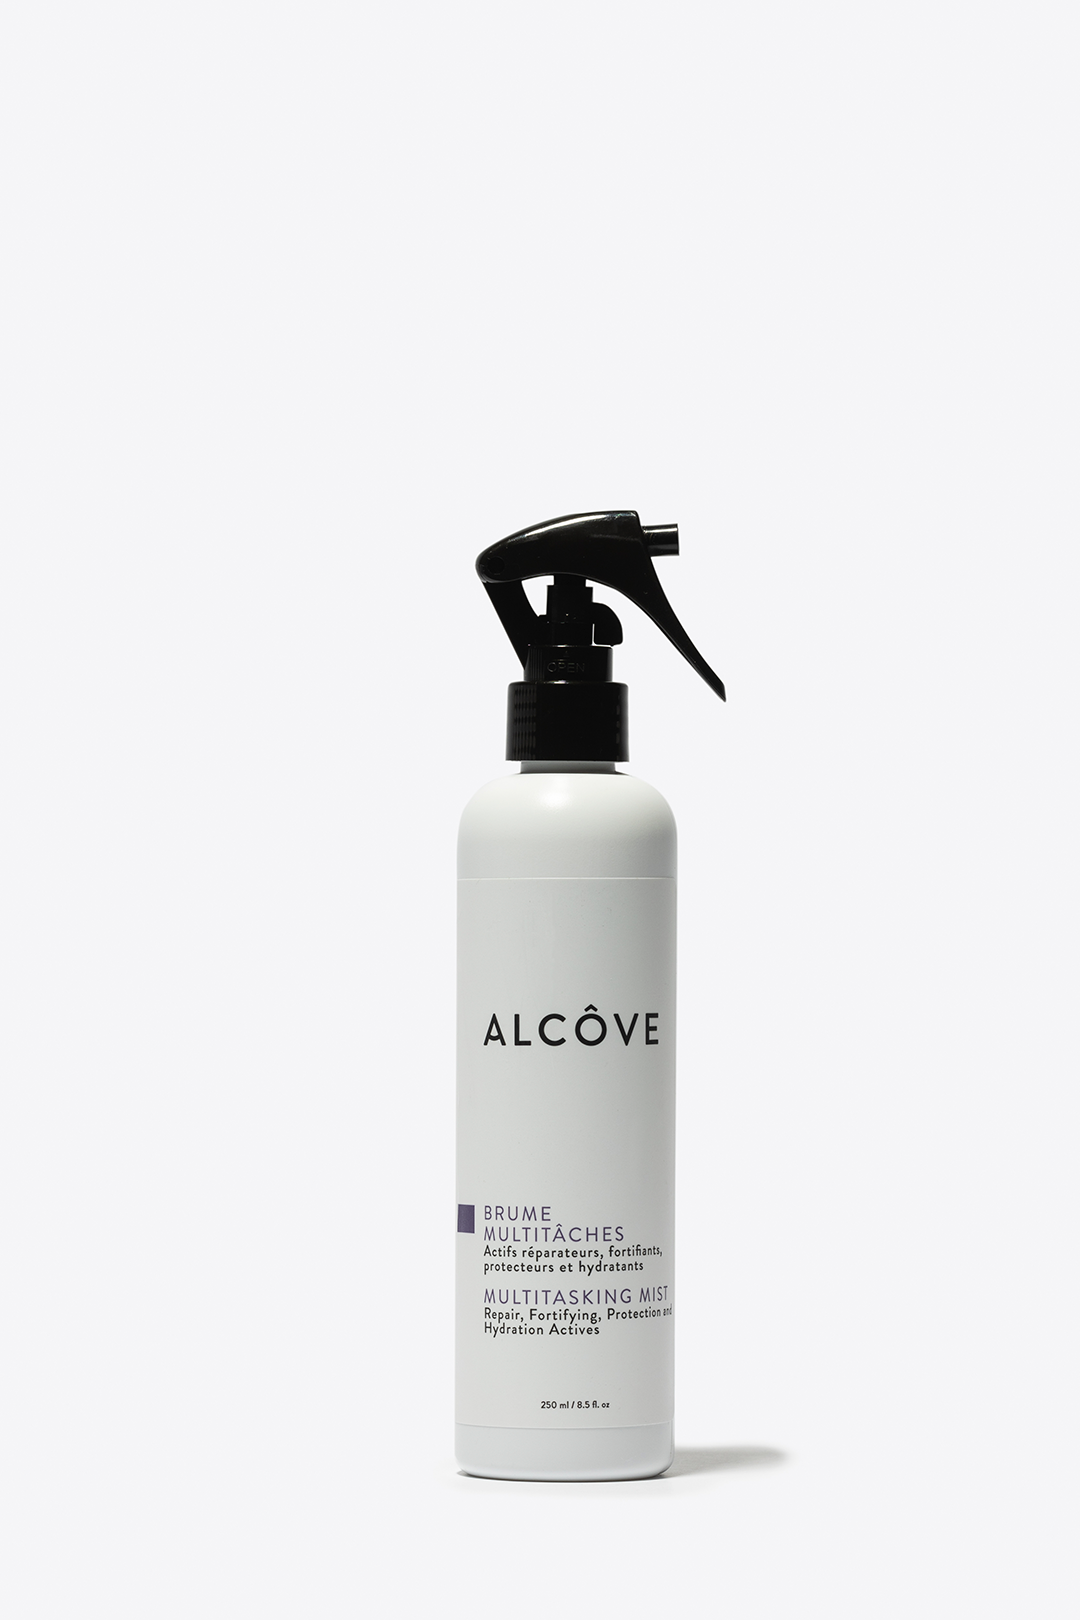 Alcove - MULTITASKING MIST - by Alcove |ProCare Outlet|